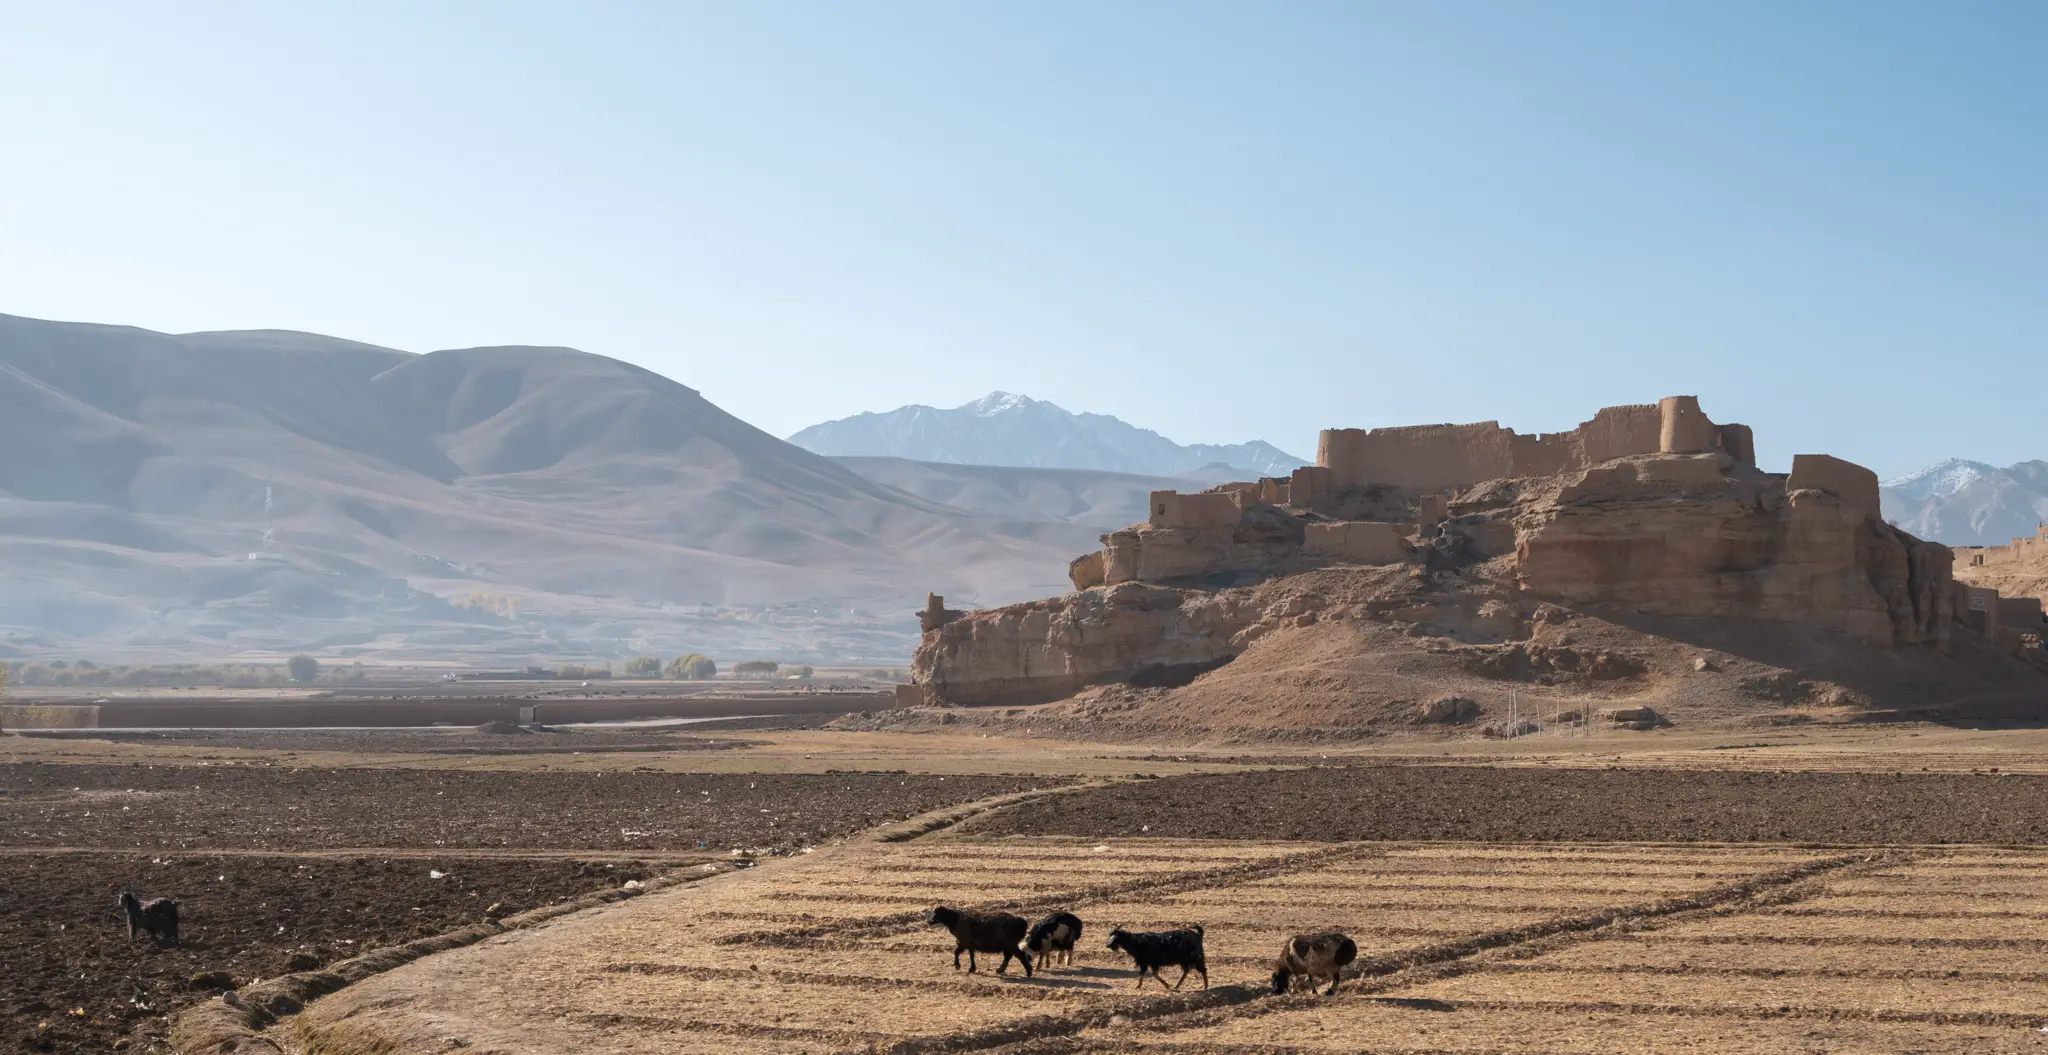 Bamiyan has countless ancient fortresses scattered around